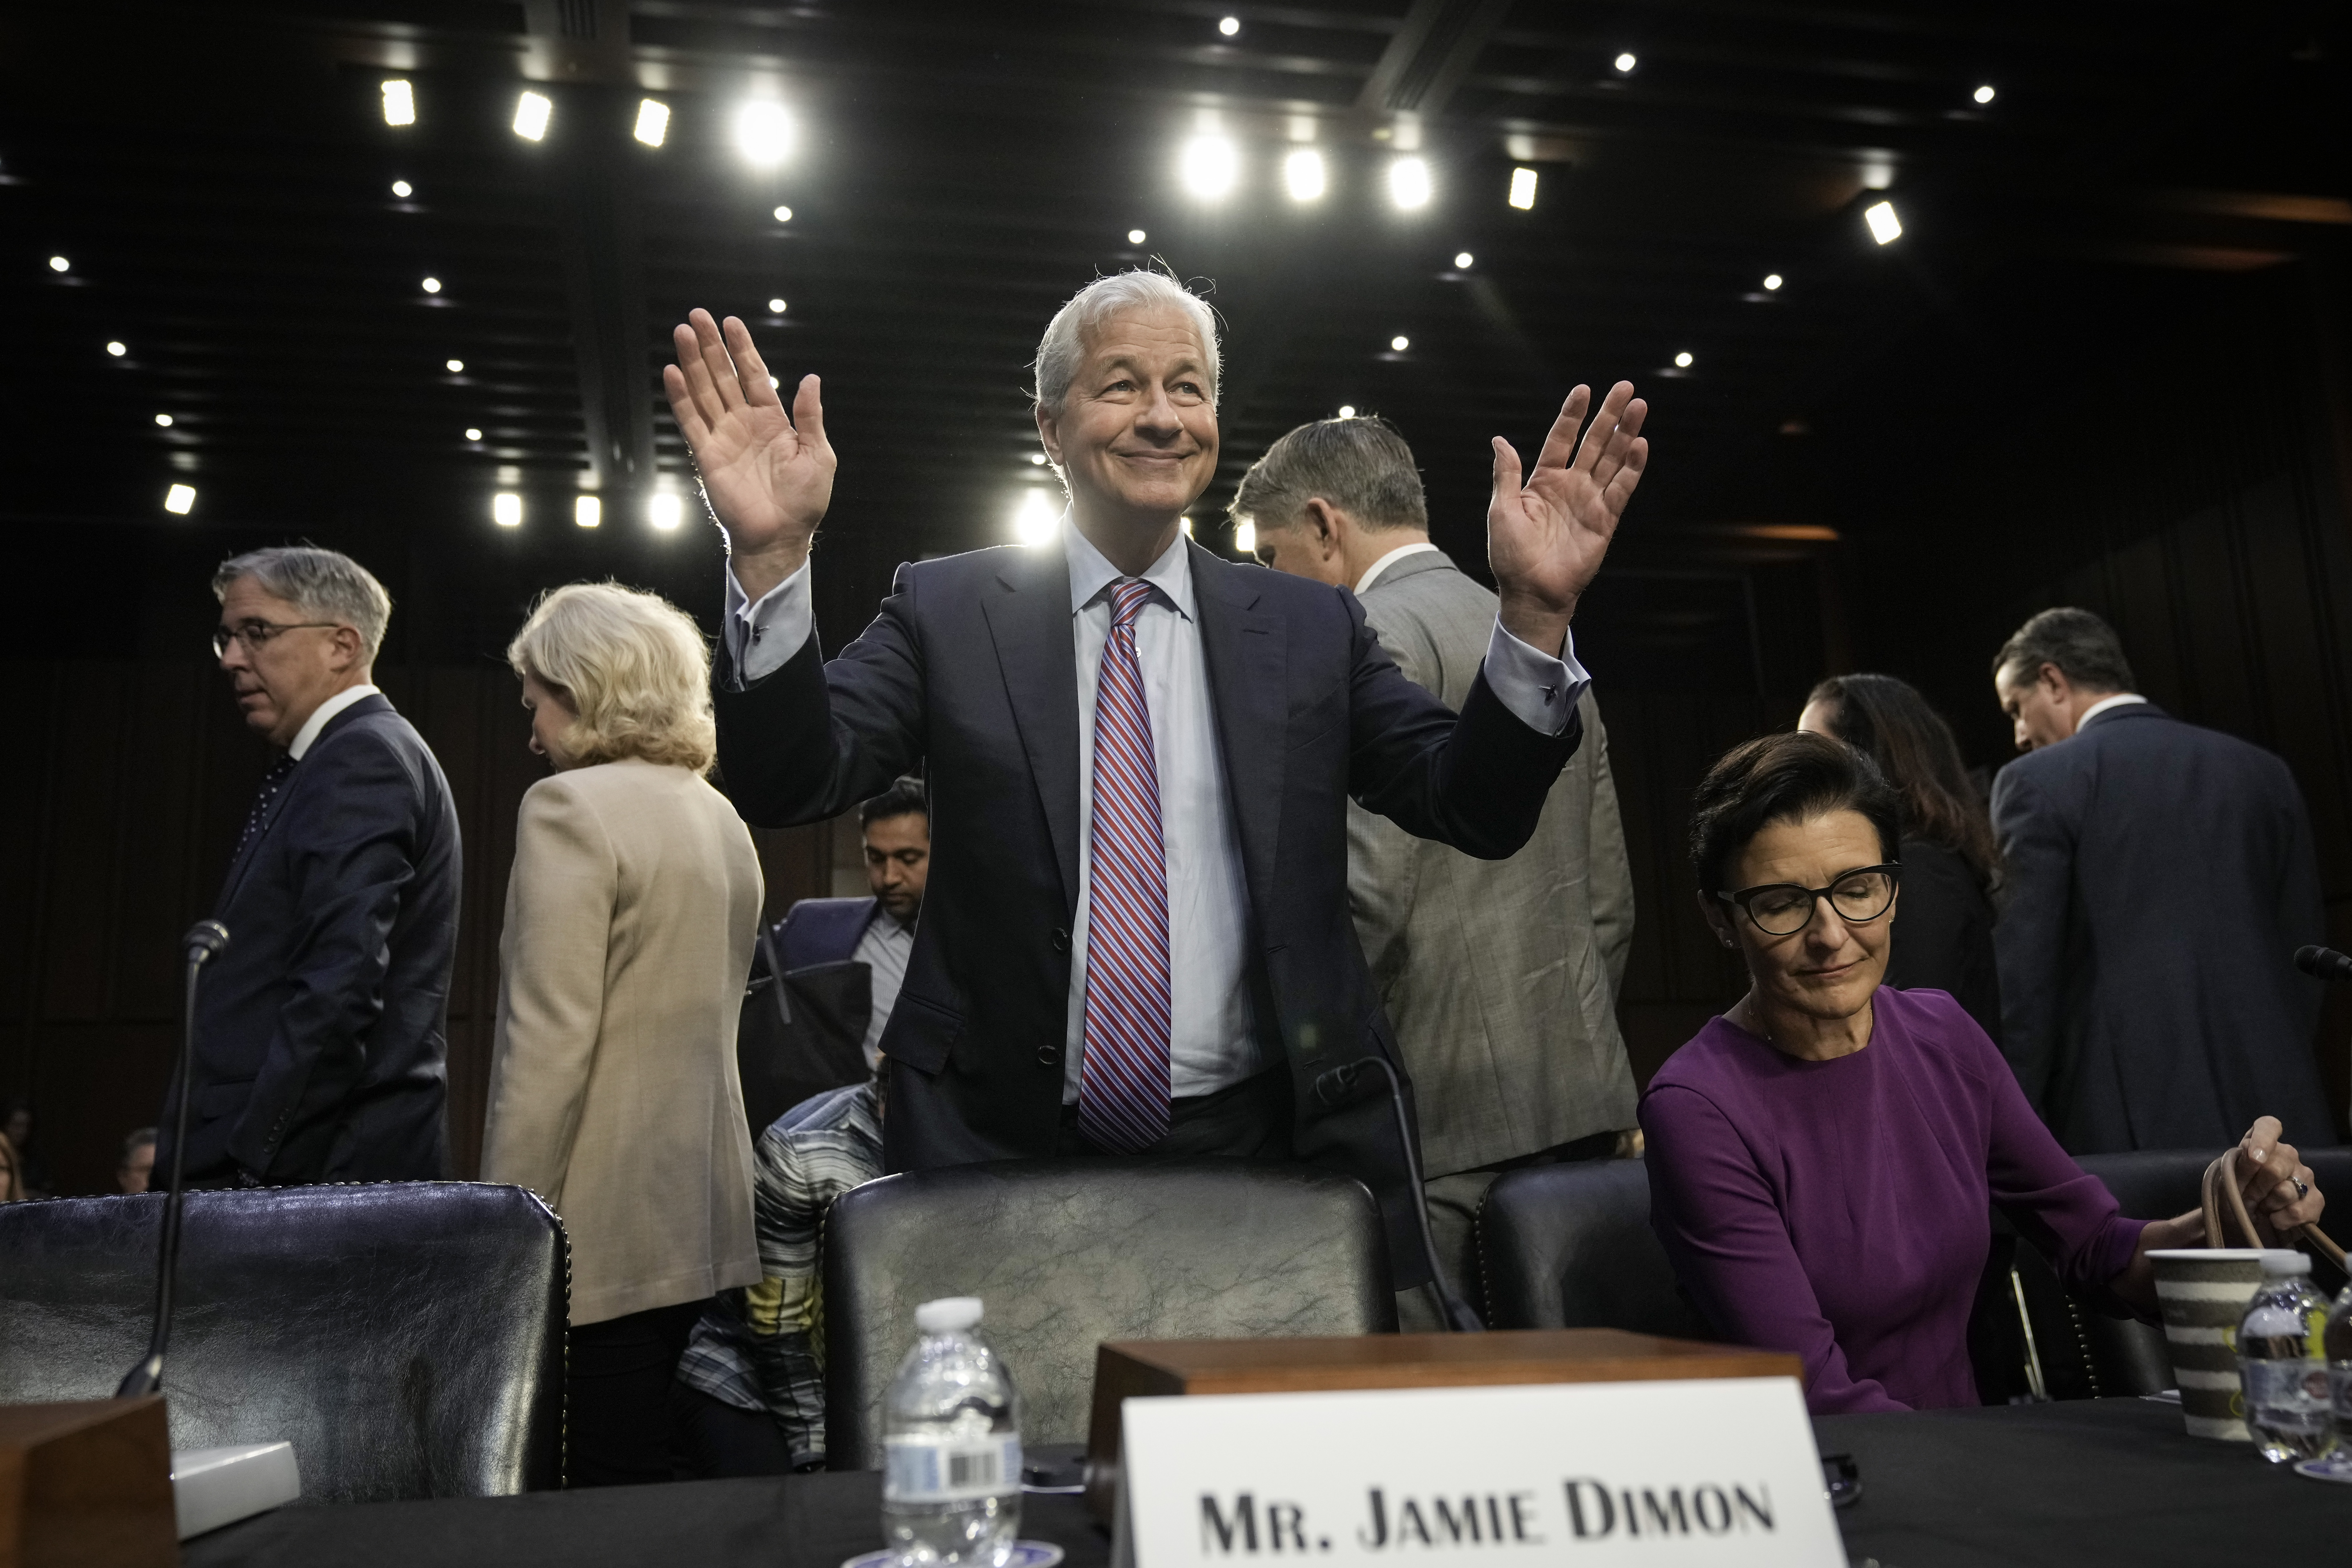 WASHINGTON, DC - SEPTEMBER 22: JPMorgan Chase & Co CEO Jamie Dimon gestures as he arrives for a Senate Banking, Housing, and Urban Affairs Committee hearing on Capitol Hill September 22, 2022 in Washington, DC. The committee held the hearing for annual oversight of the nation's largest banks. (Photo by Drew Angerer/Getty Images)